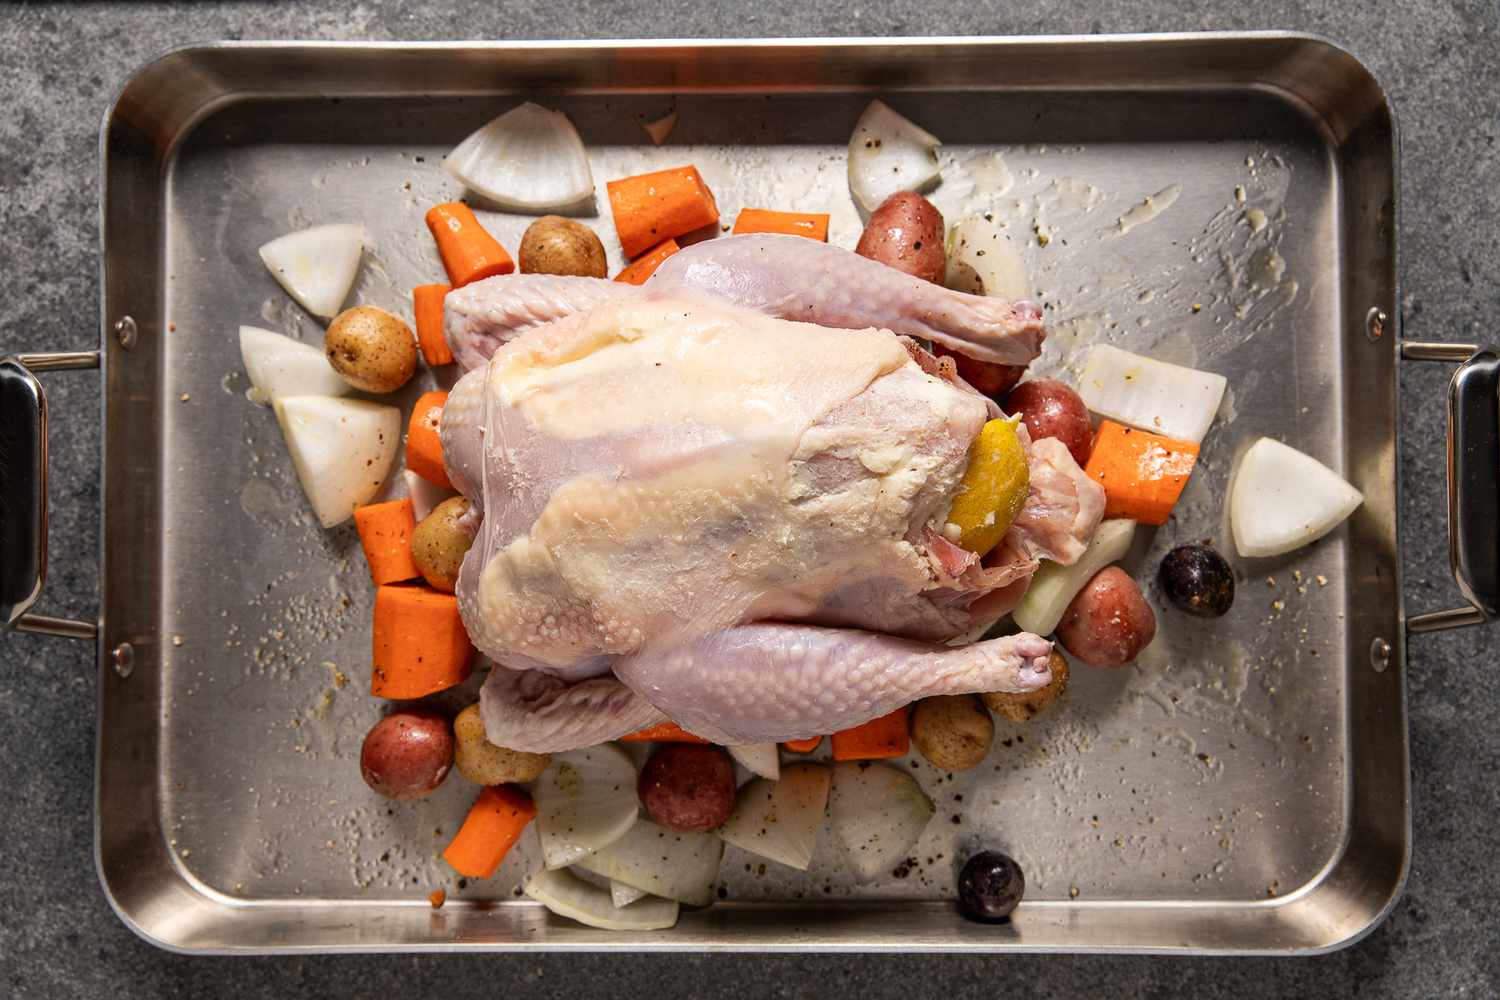 Seasoned whole chicken placed on seasoned vegetables in the roasting pan for roast chicken recipe